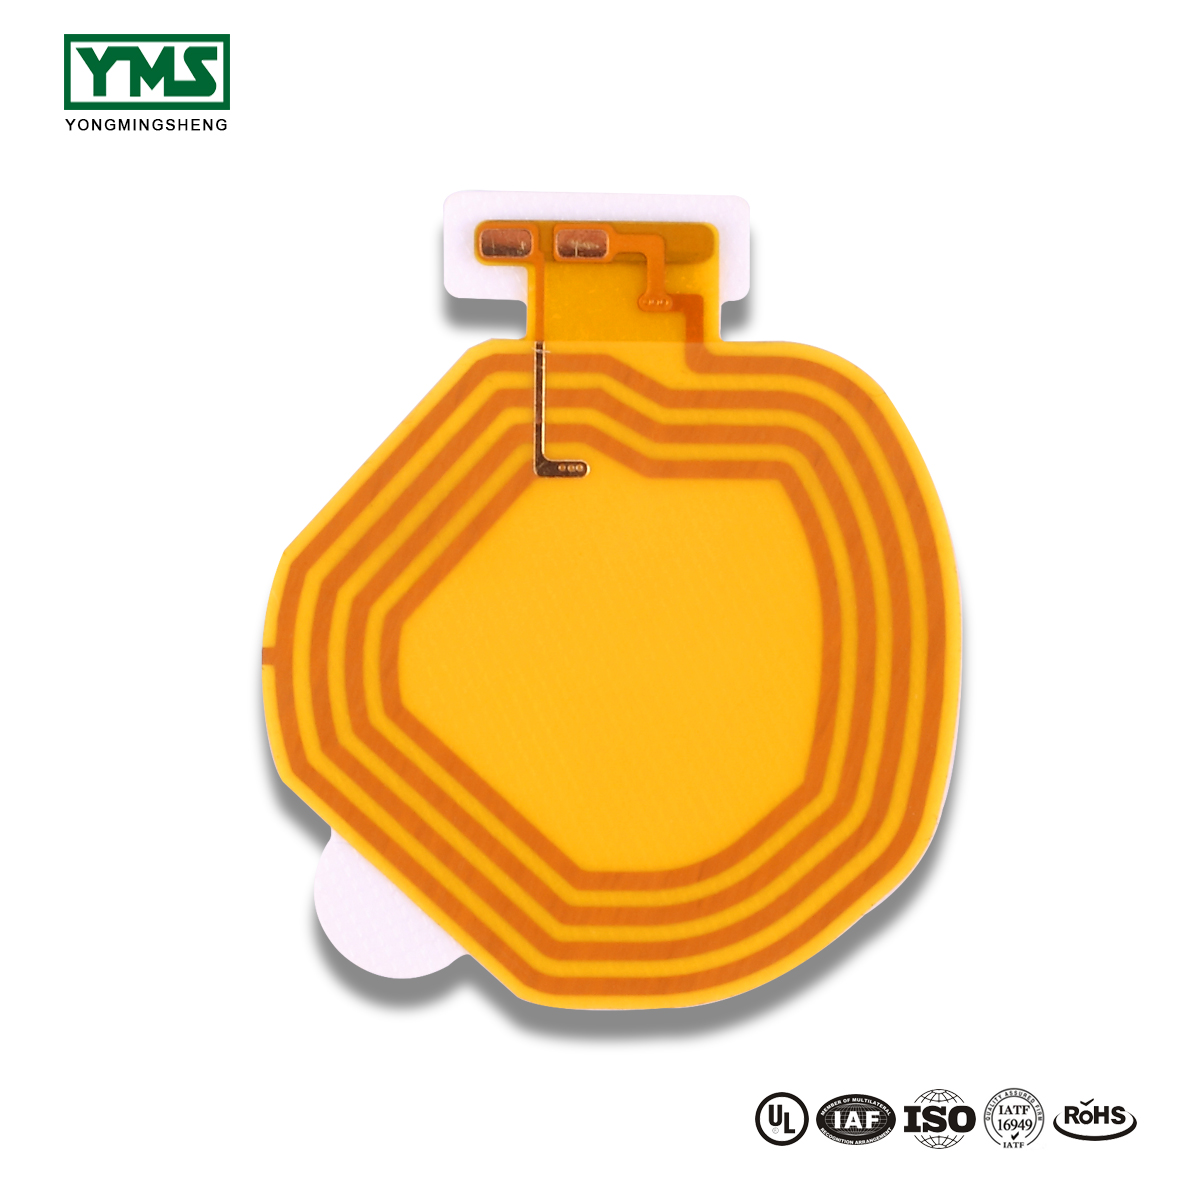 Factory Free sample High Frequency Pcb - 1Layer Flexible Board | YMSPCB – Yongmingsheng